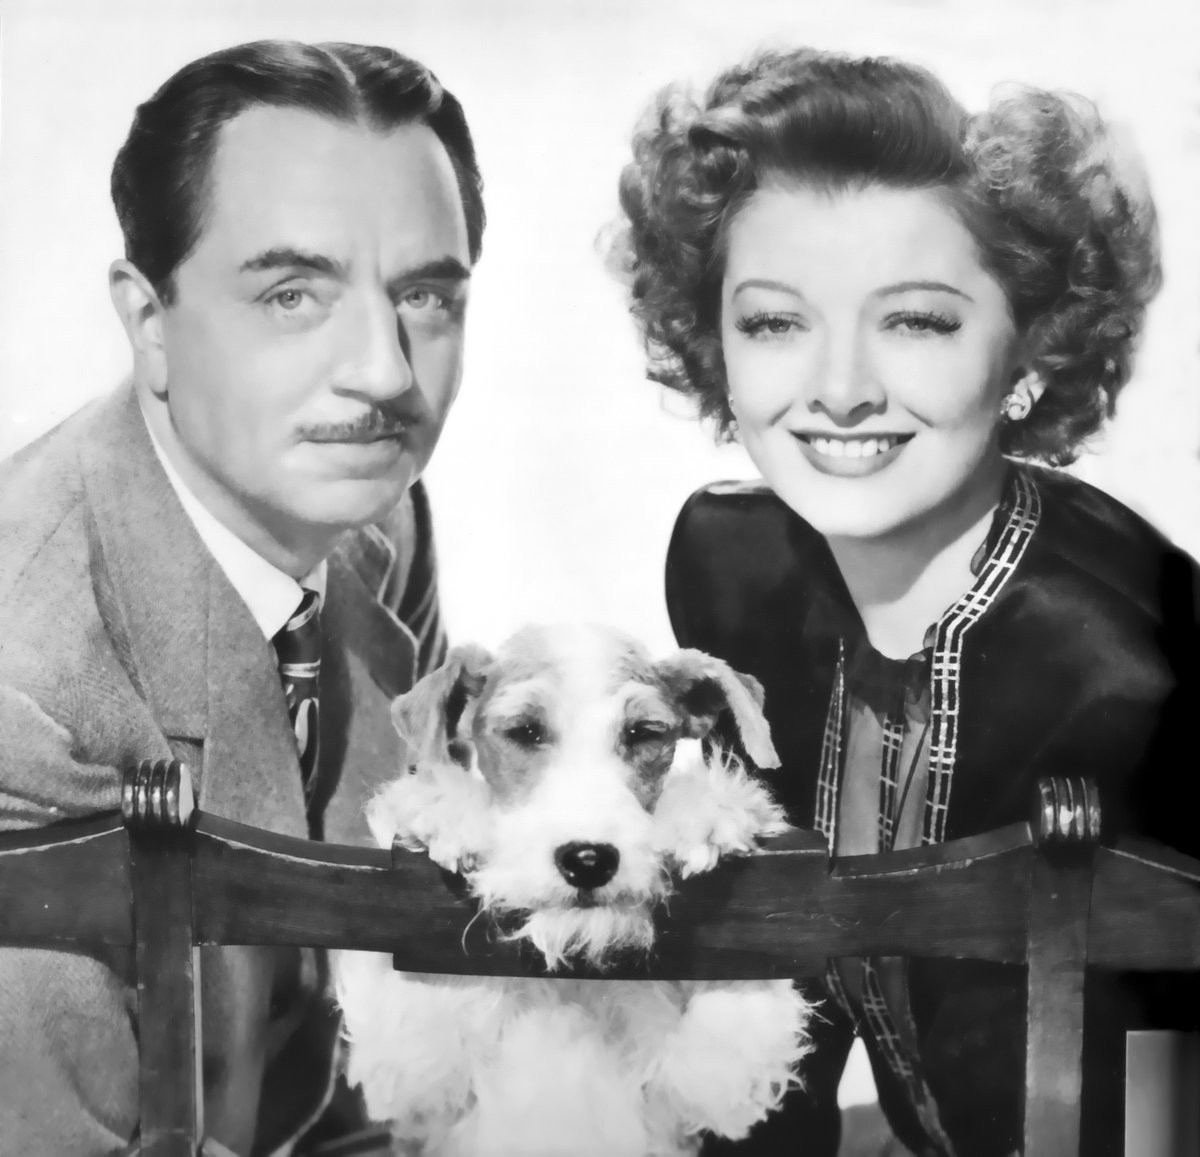 Happy New Year's Eve, everybody! There's plenty more Nick, Nora, and Asta to come!  #TheThinMan  #TCMParty  #BillandMyrnaForever